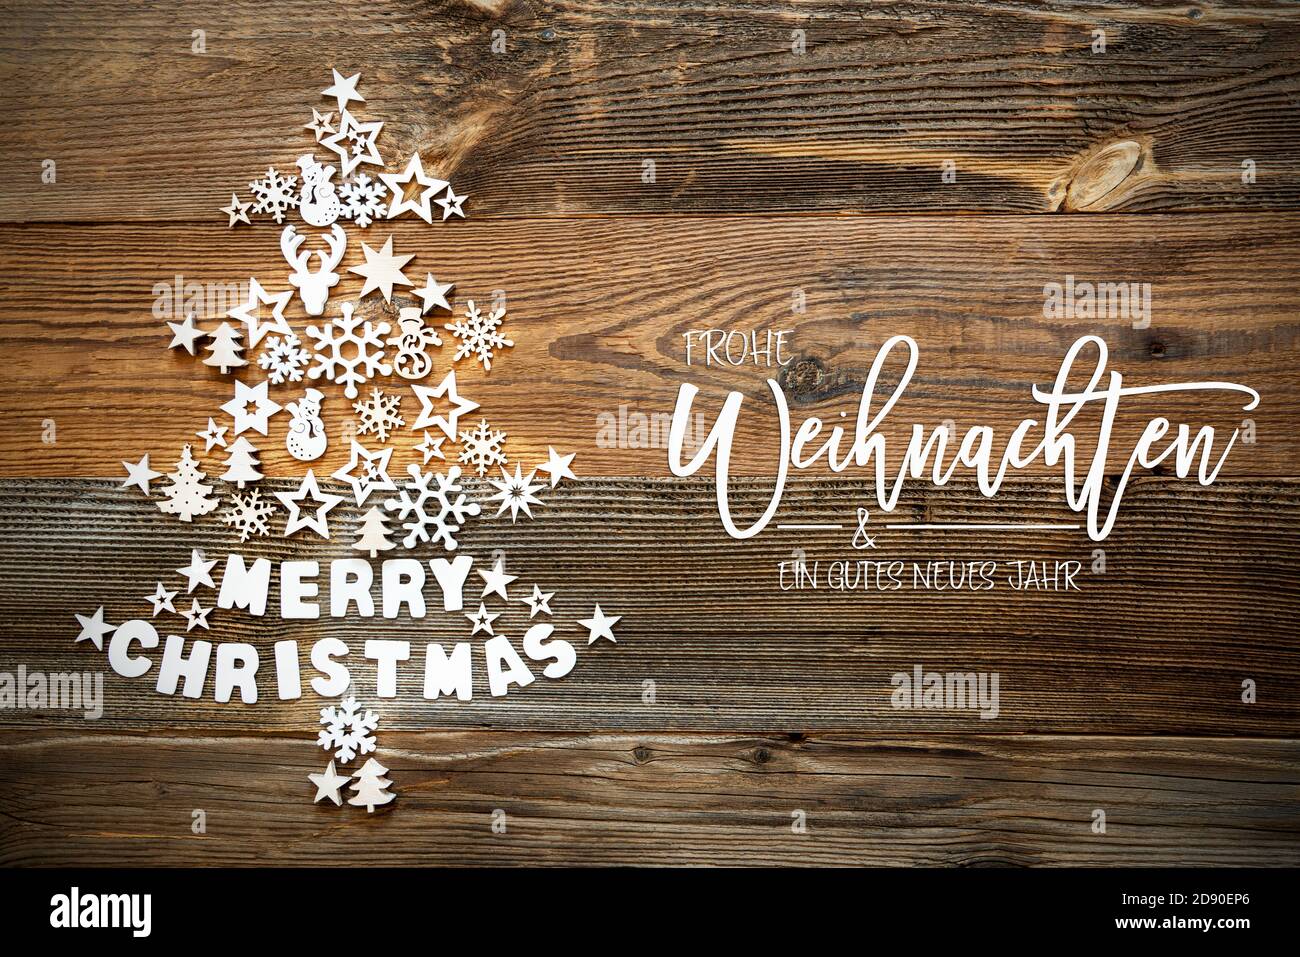 Christmas Tree, White Decoration, Gutes Neues Jahr Means Happy New Year Stock Photo